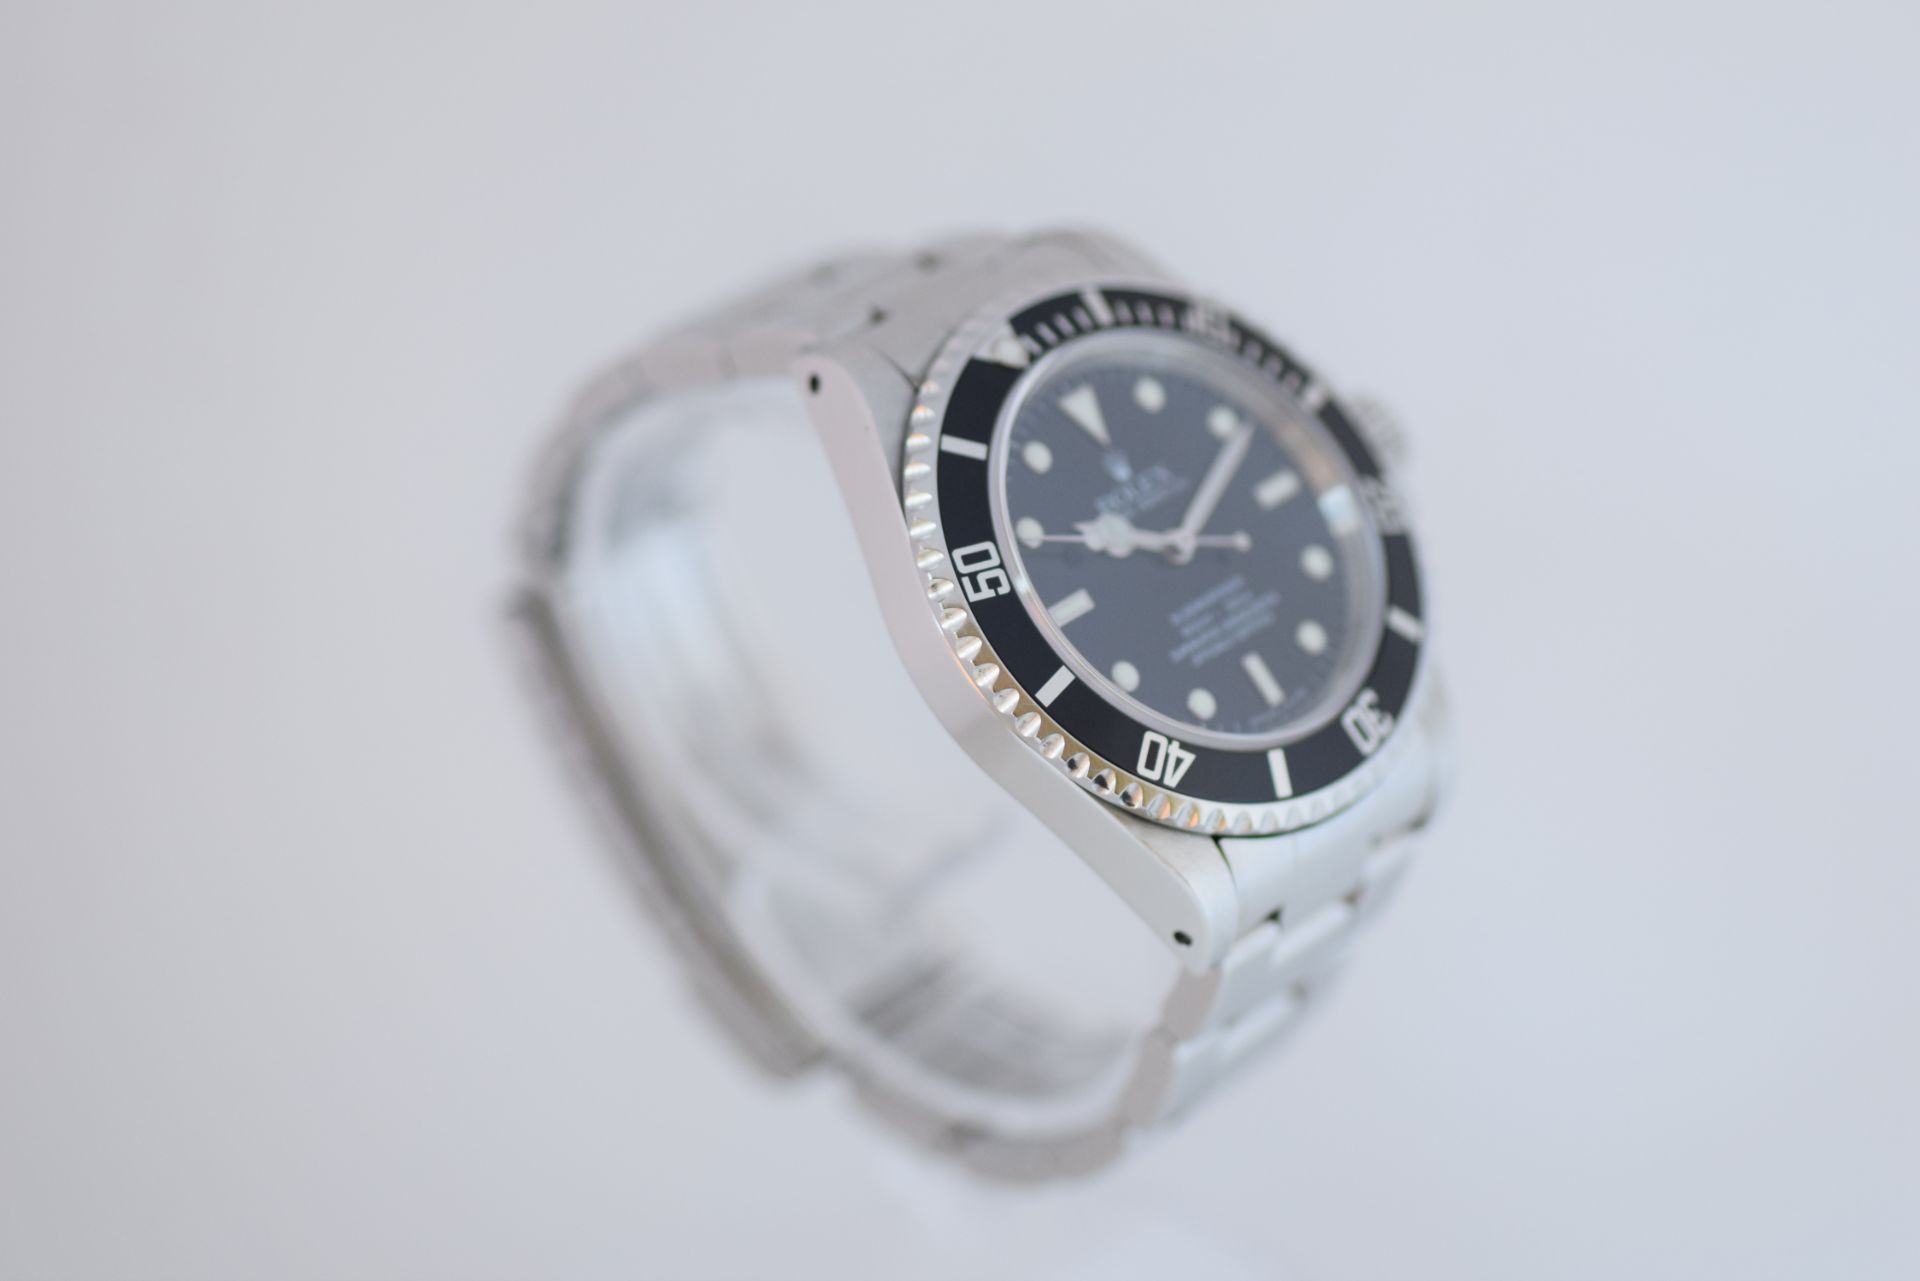 Rolex 14060M Non Date Submariner 2009 Engraved Rehaut 2009 Wty Card - Image 7 of 10